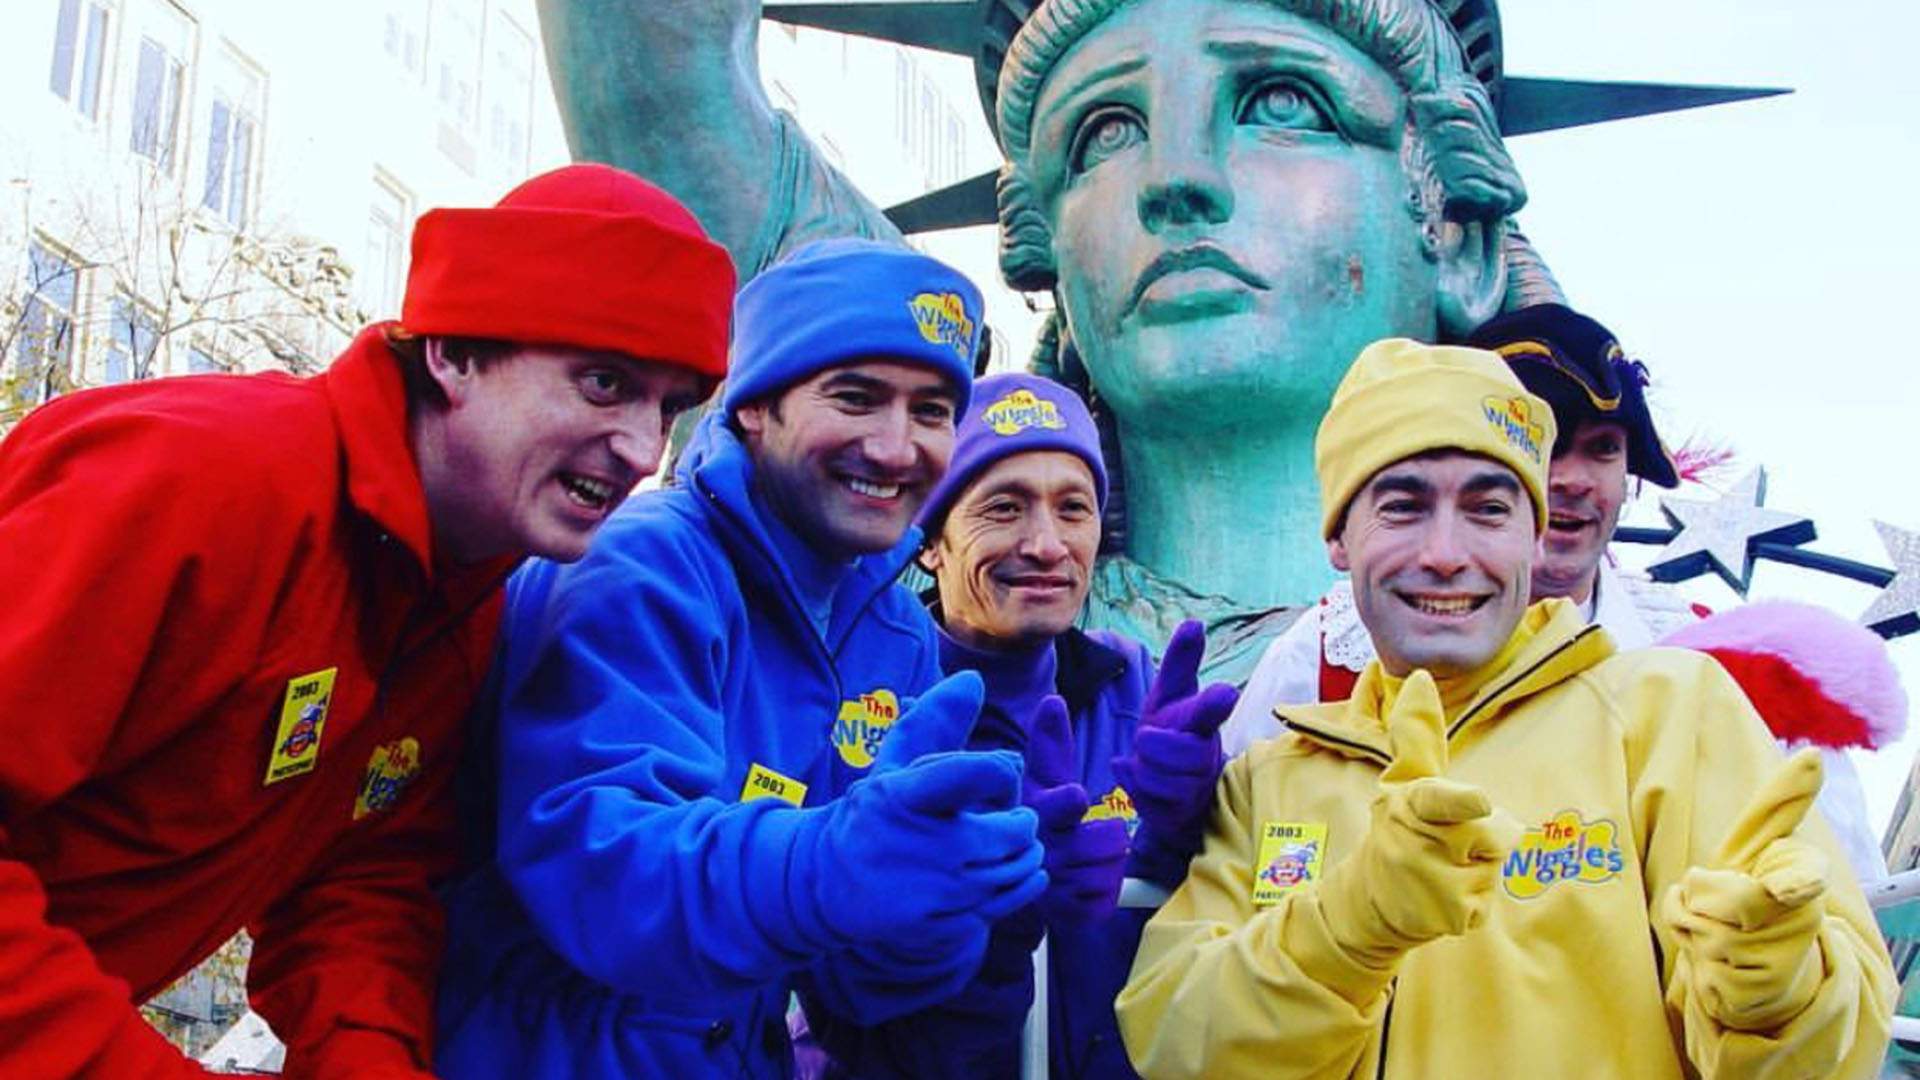 'Hot Potato: The Story of The Wiggles' Is SXSW Sydney's First Big Local World-Premiere Film